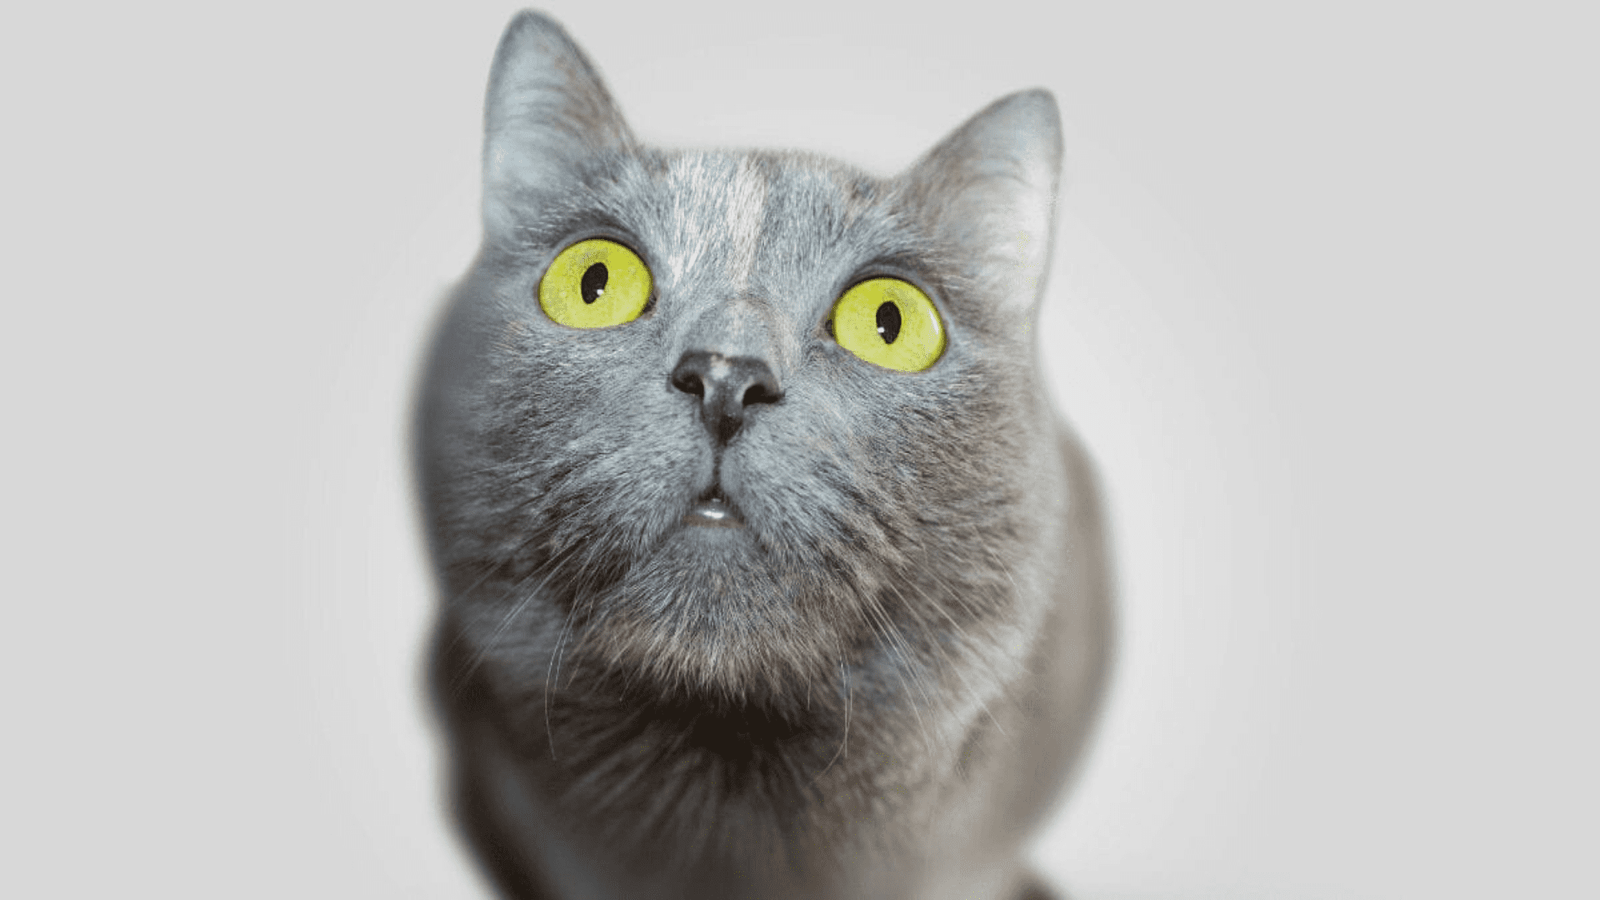 See world through your cat’s eyes